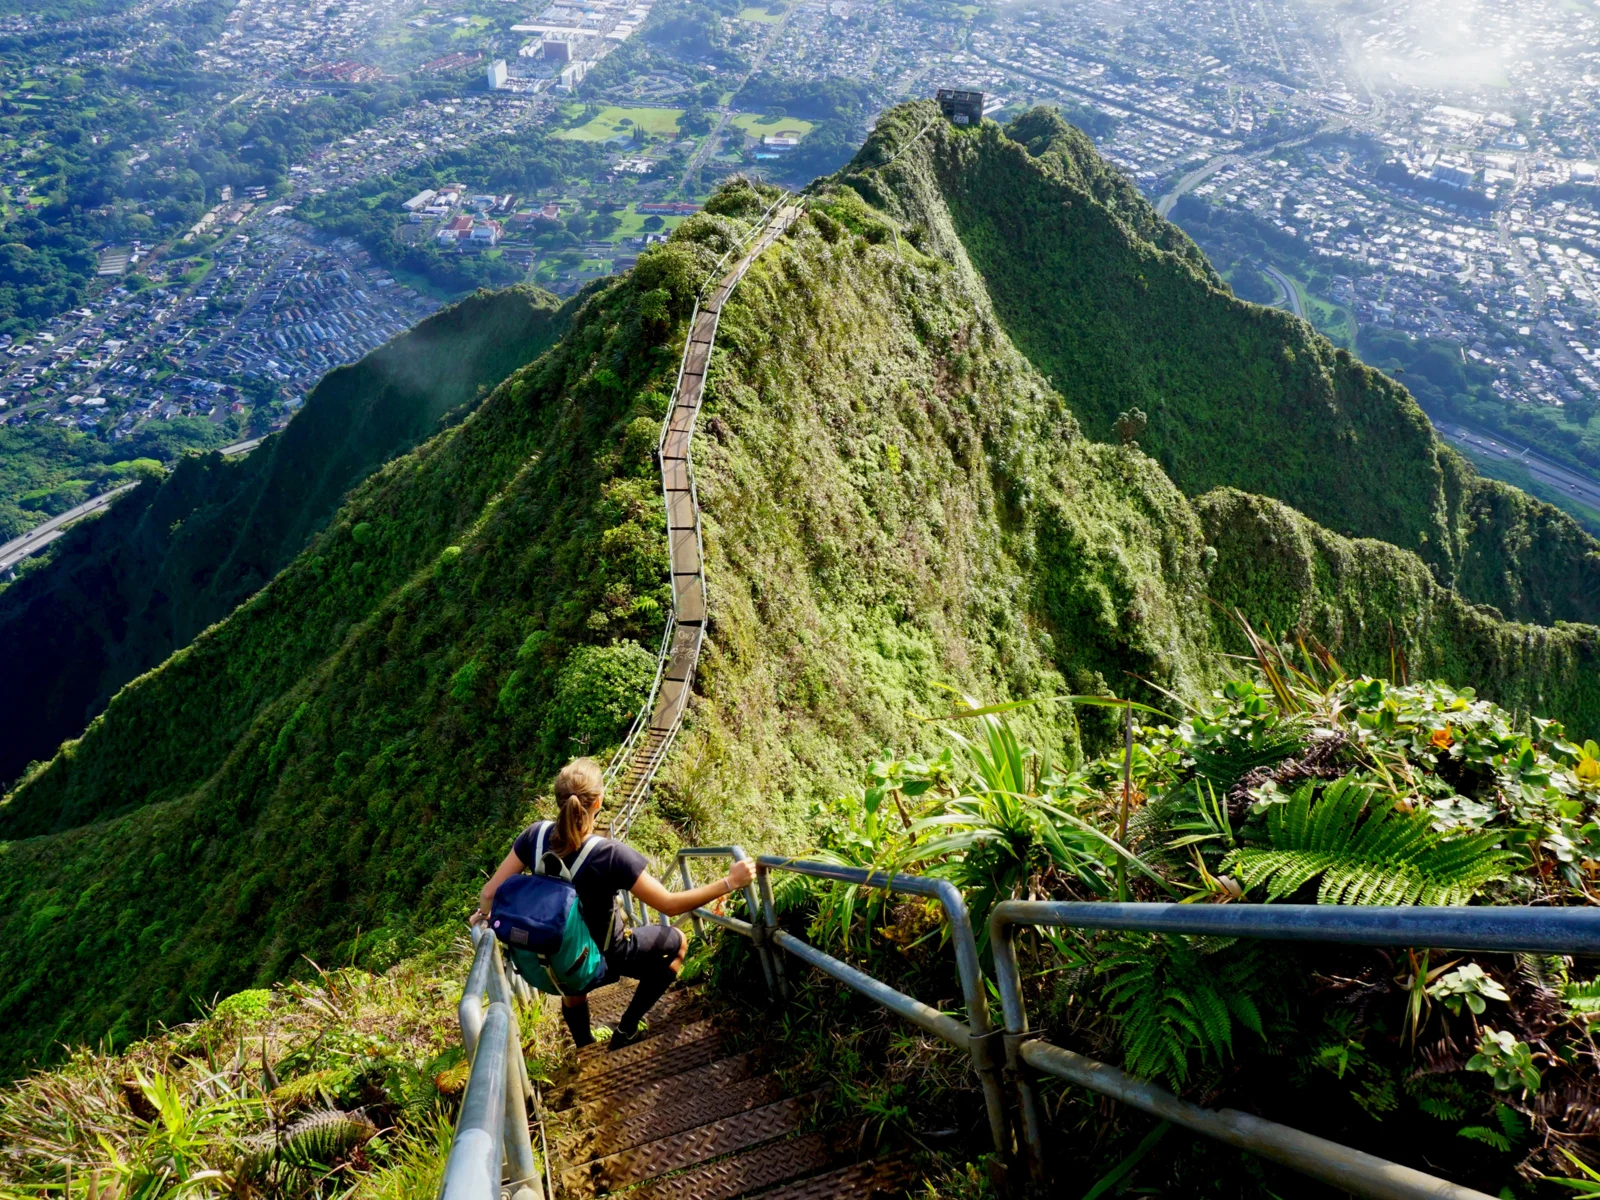 For a piece titled Is Hawaii Safe to Visit, a woman is pictured climbing the Stairway to Heaven hike on Oahu